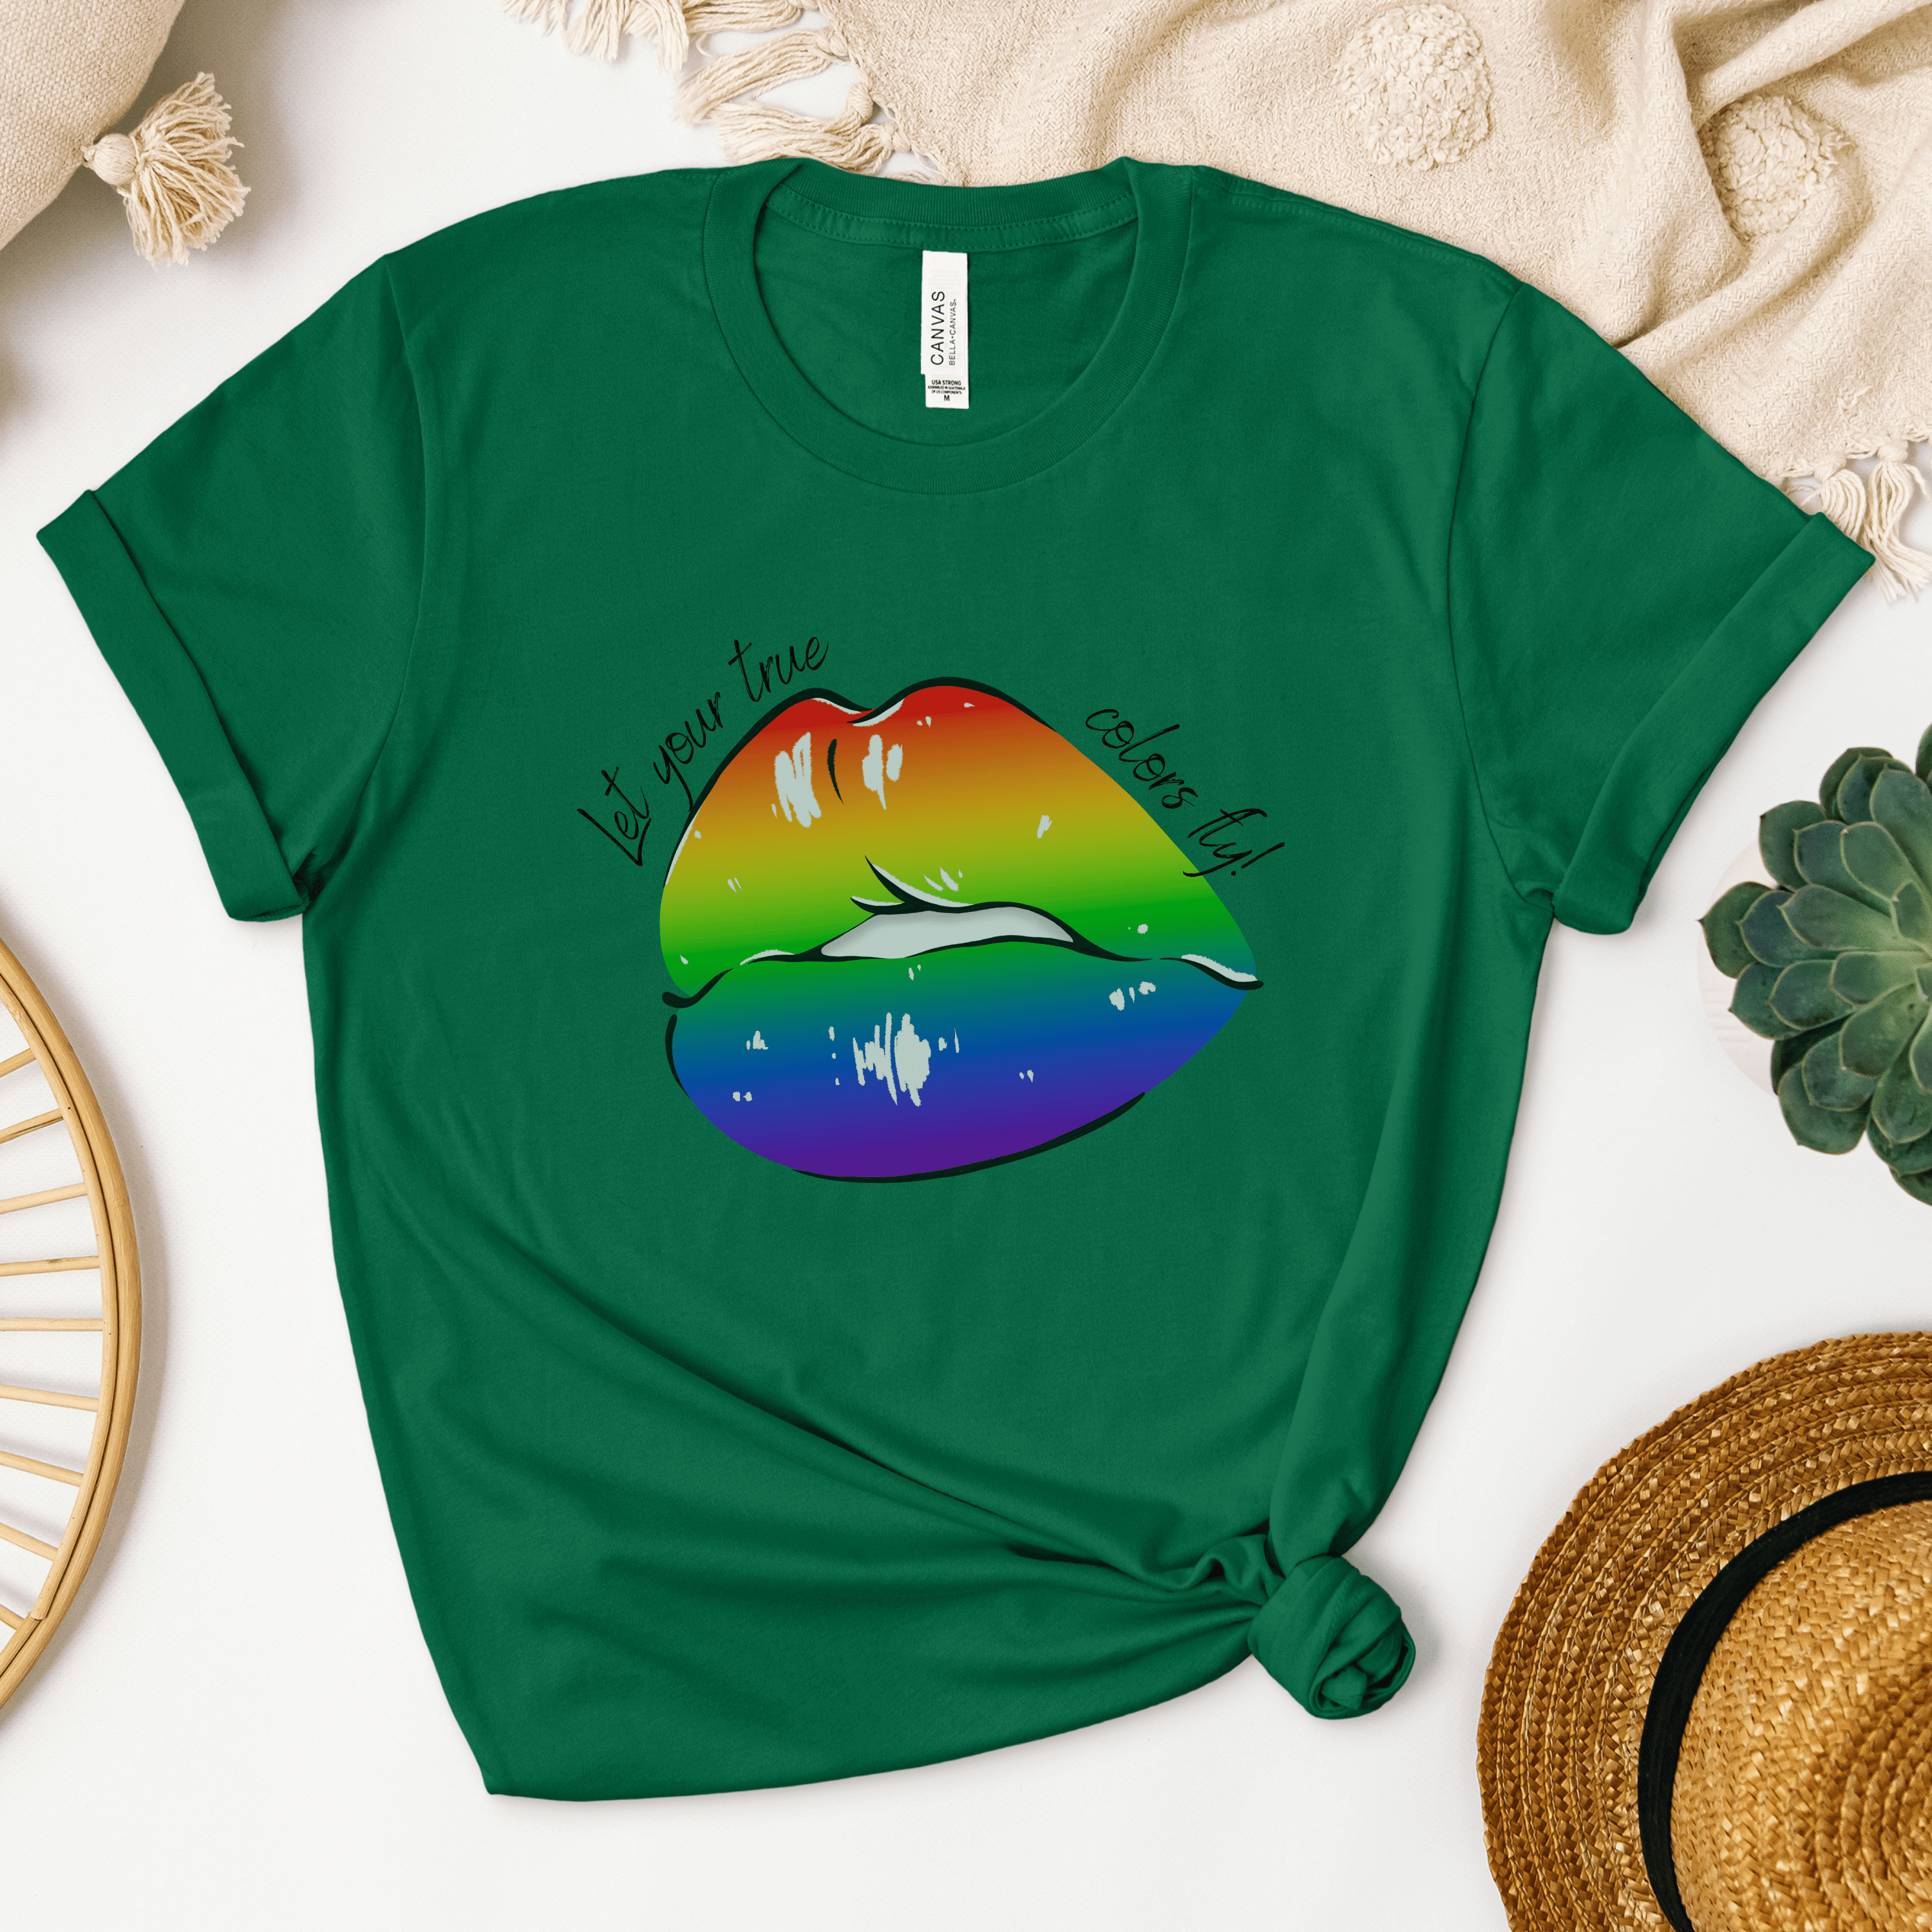 Let Your True Colors Fly!" T-shirt